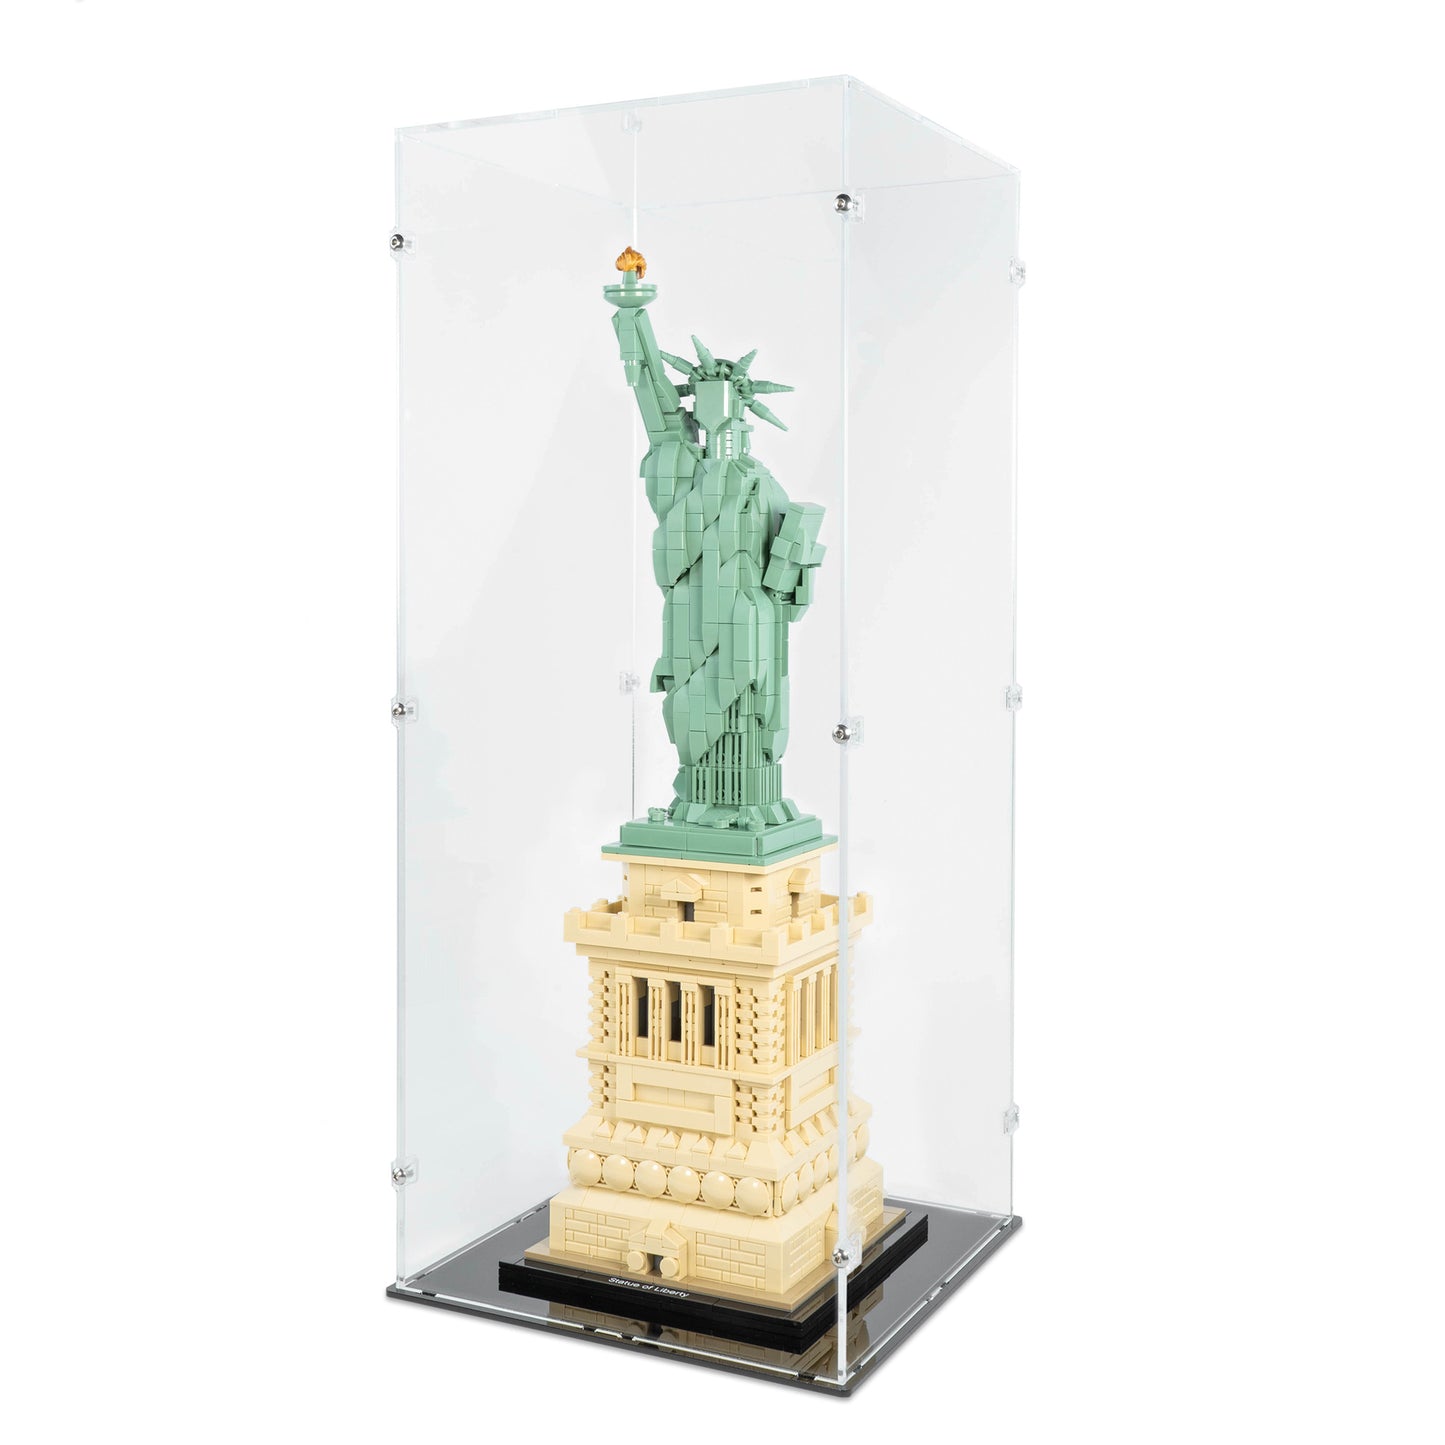 Angled view of LEGO 21042 Statue of Liberty Display Case.